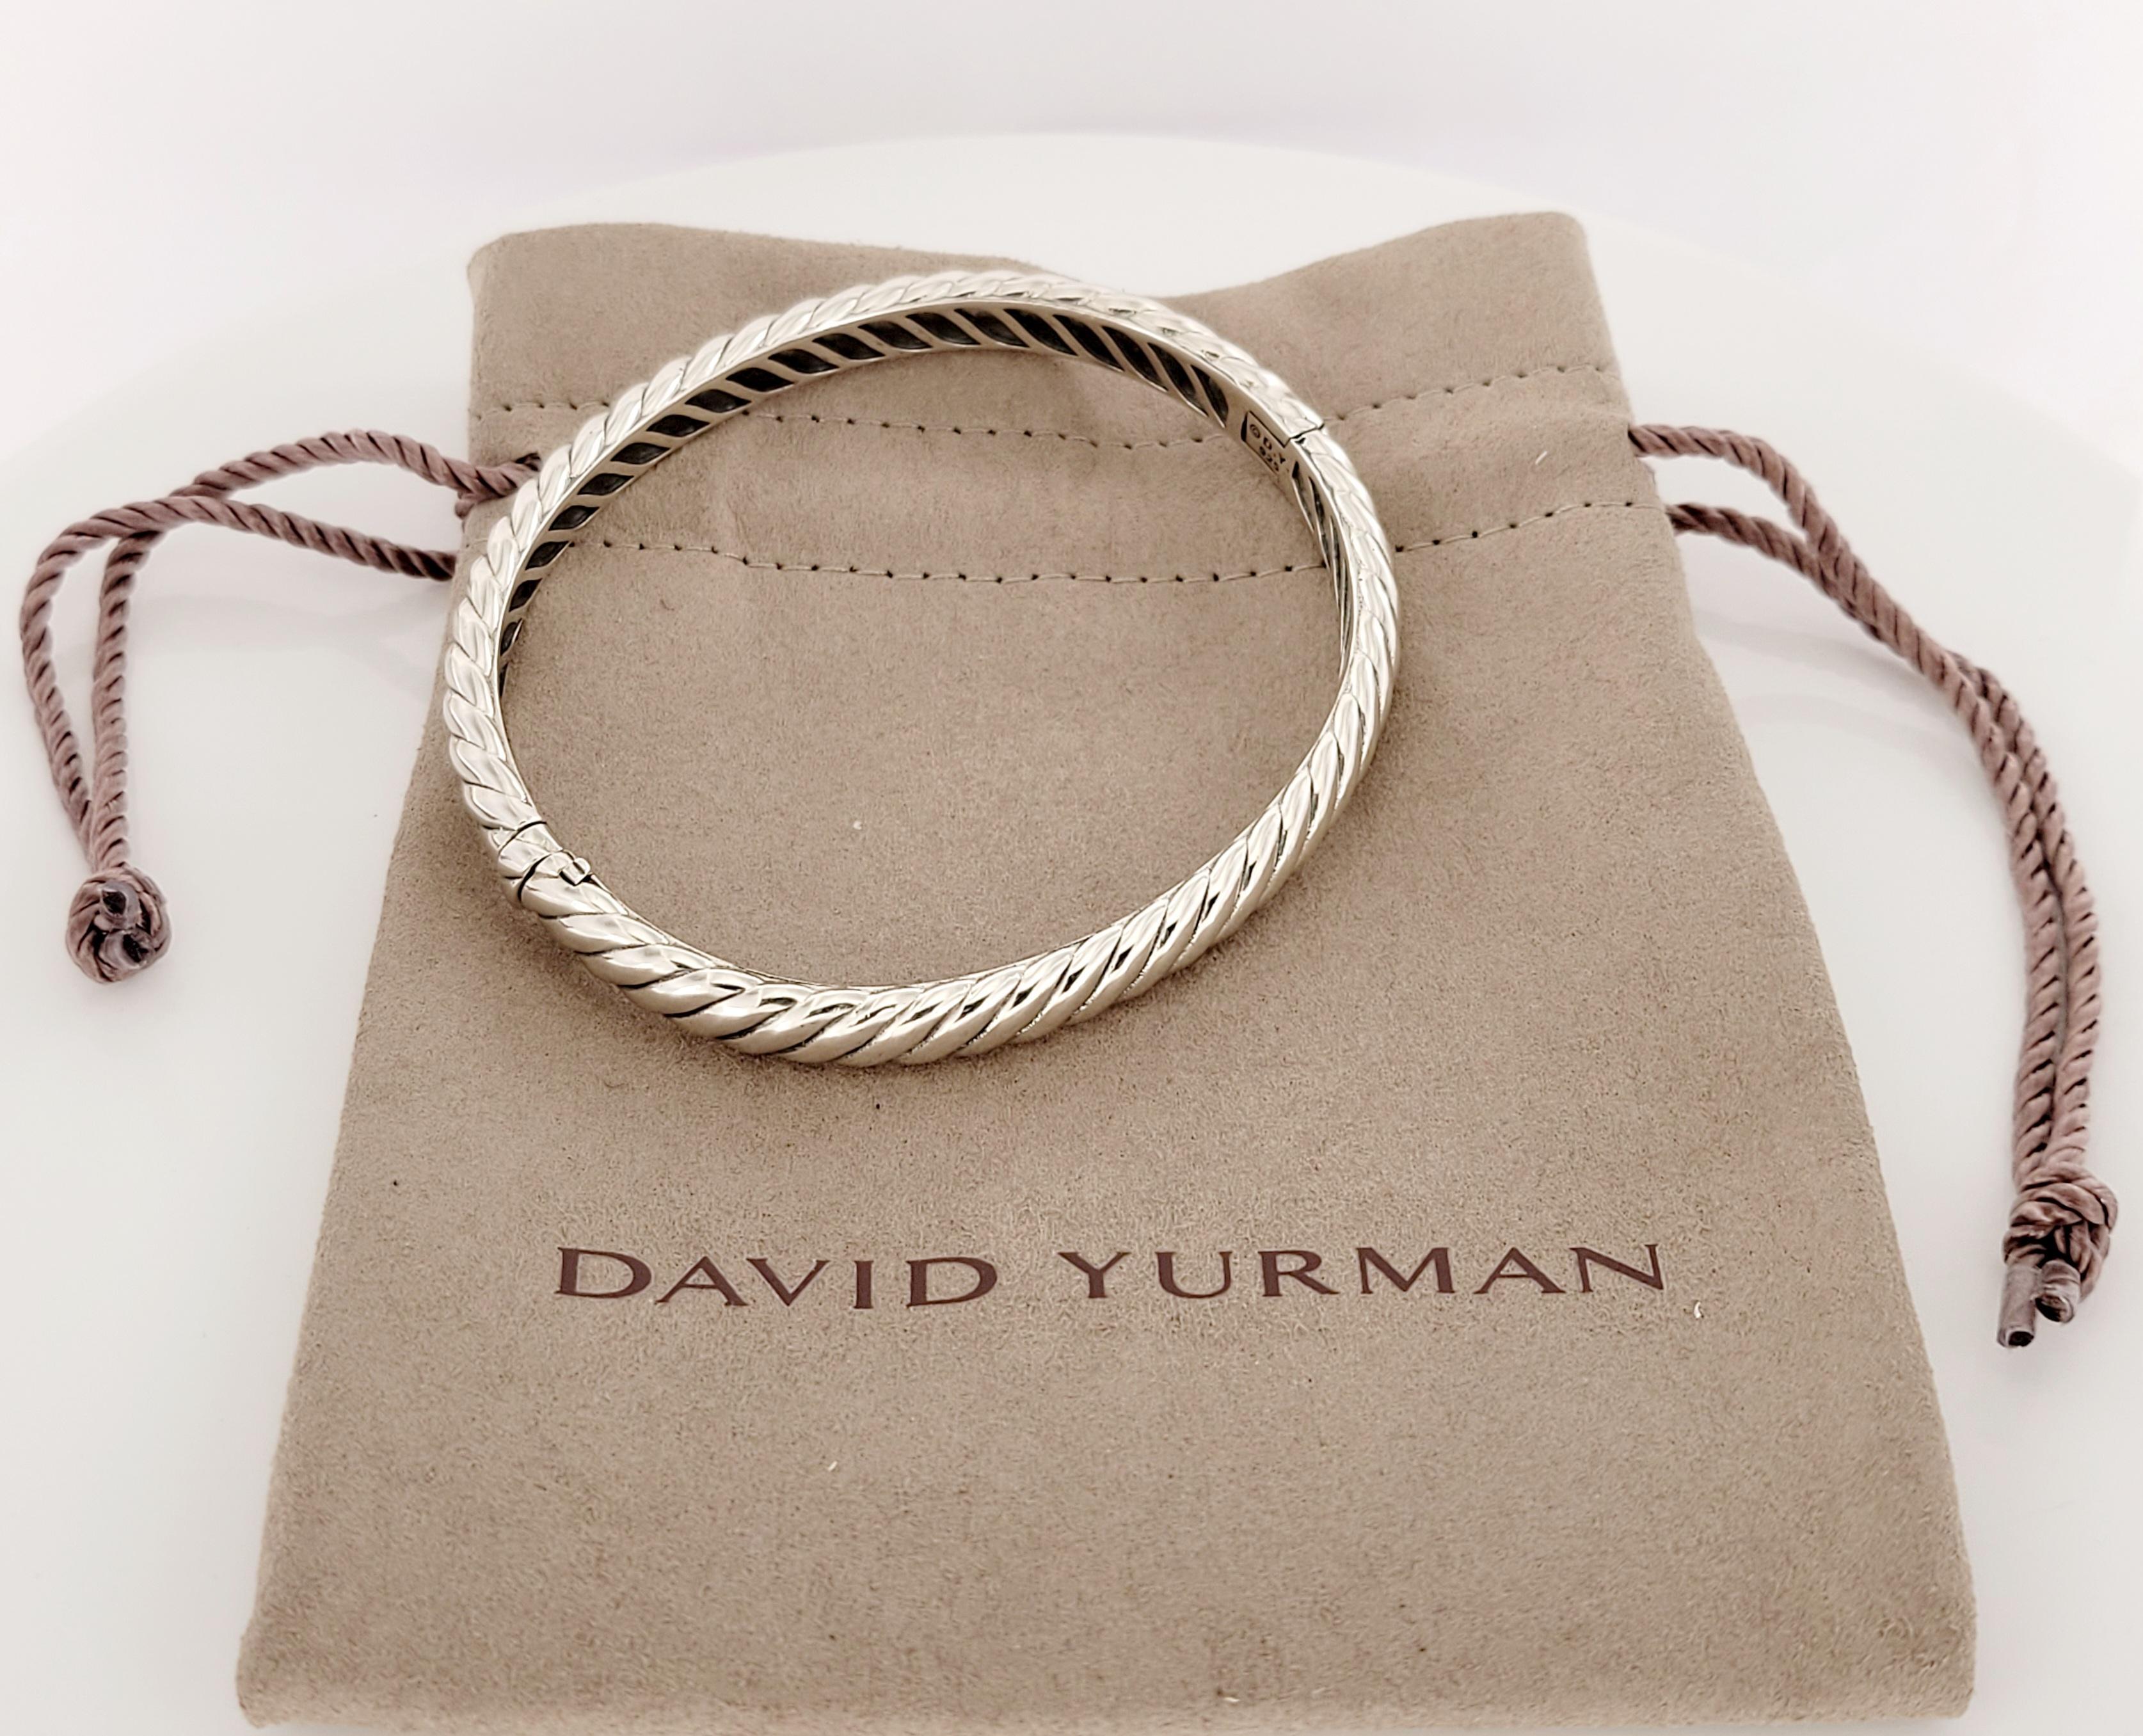 Brand David Yurman
Mint Condition
Medium size
Sterling Silver 
Bracelet 7mm
Weight 37.7gr
Retail price $650
Comes with David Yurman pouch